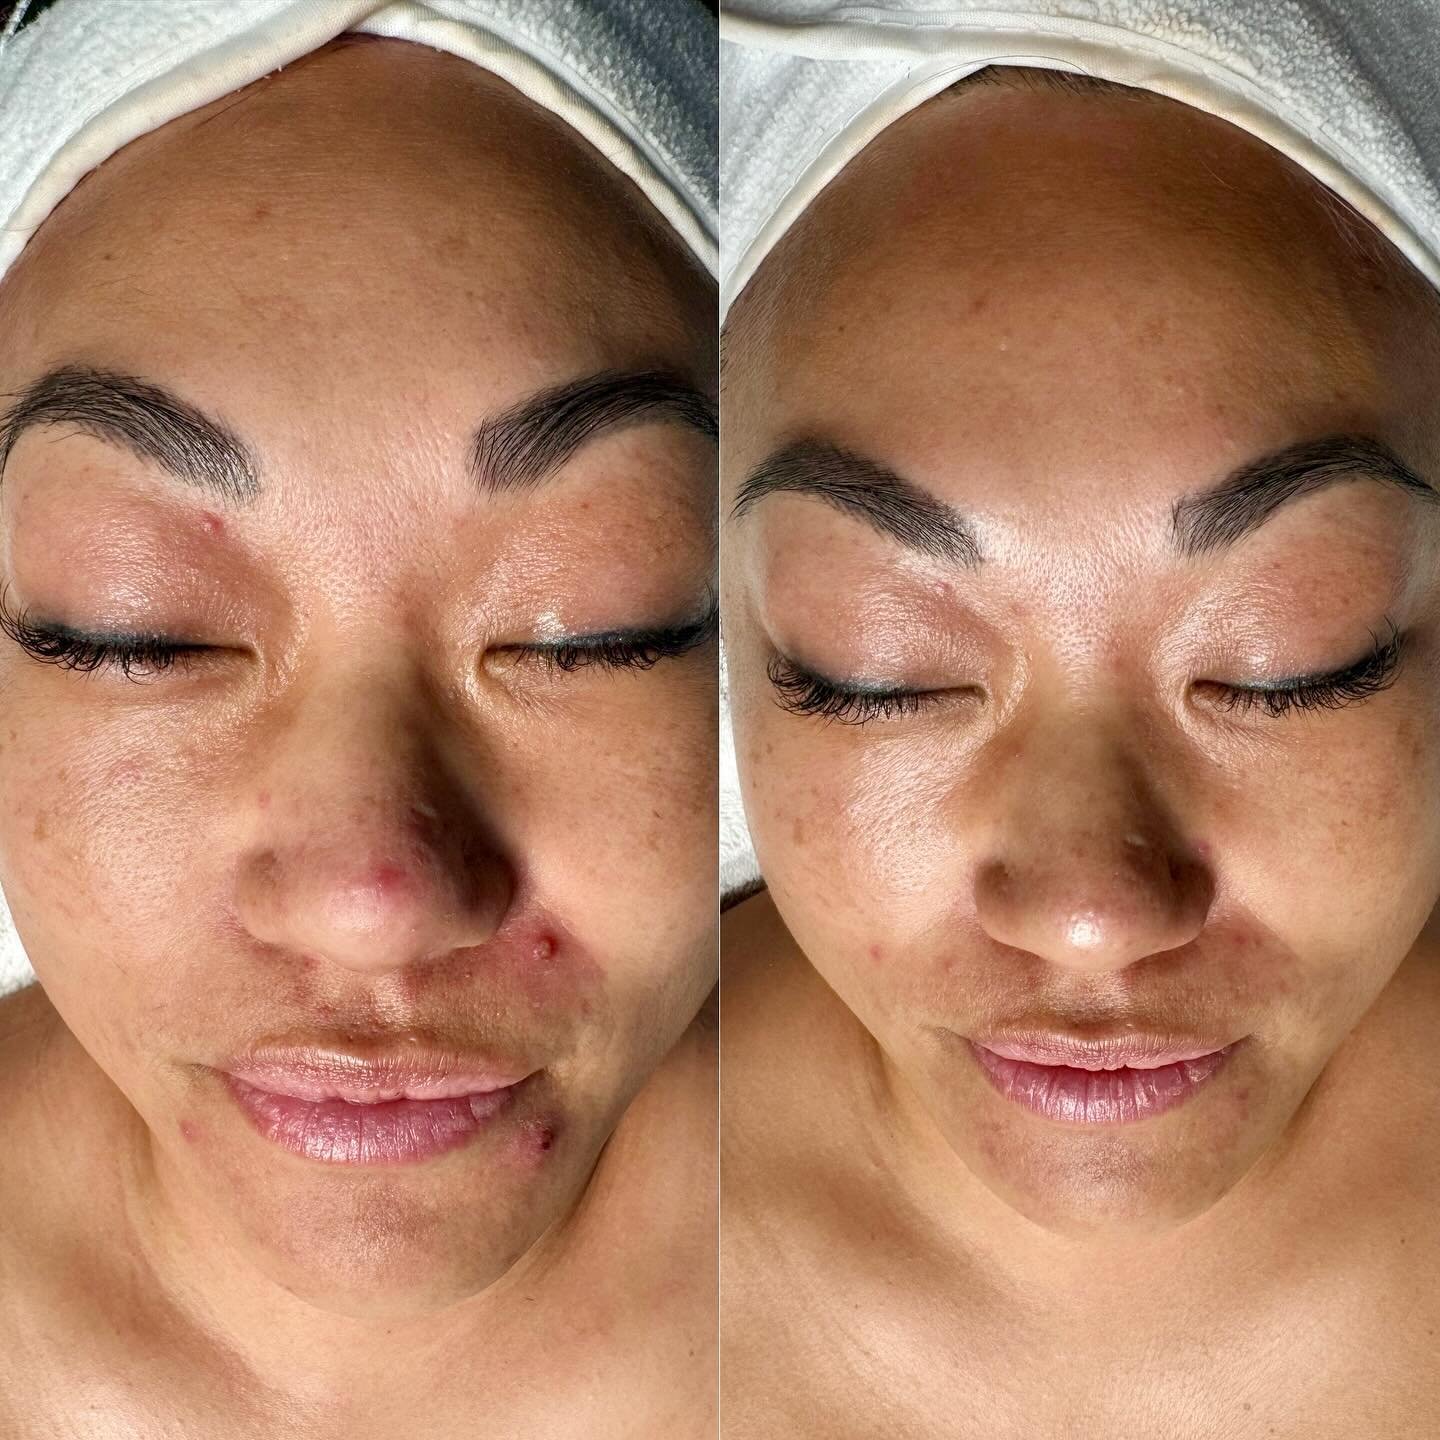 〰️ @dmkinternational and just getting started 🥳 before and after photos are within 2 weeks of each other, one taken April 23, and the right May 8. This is after getting one Enzyme Treatment to address Acne congestion. Followed up with her second tre